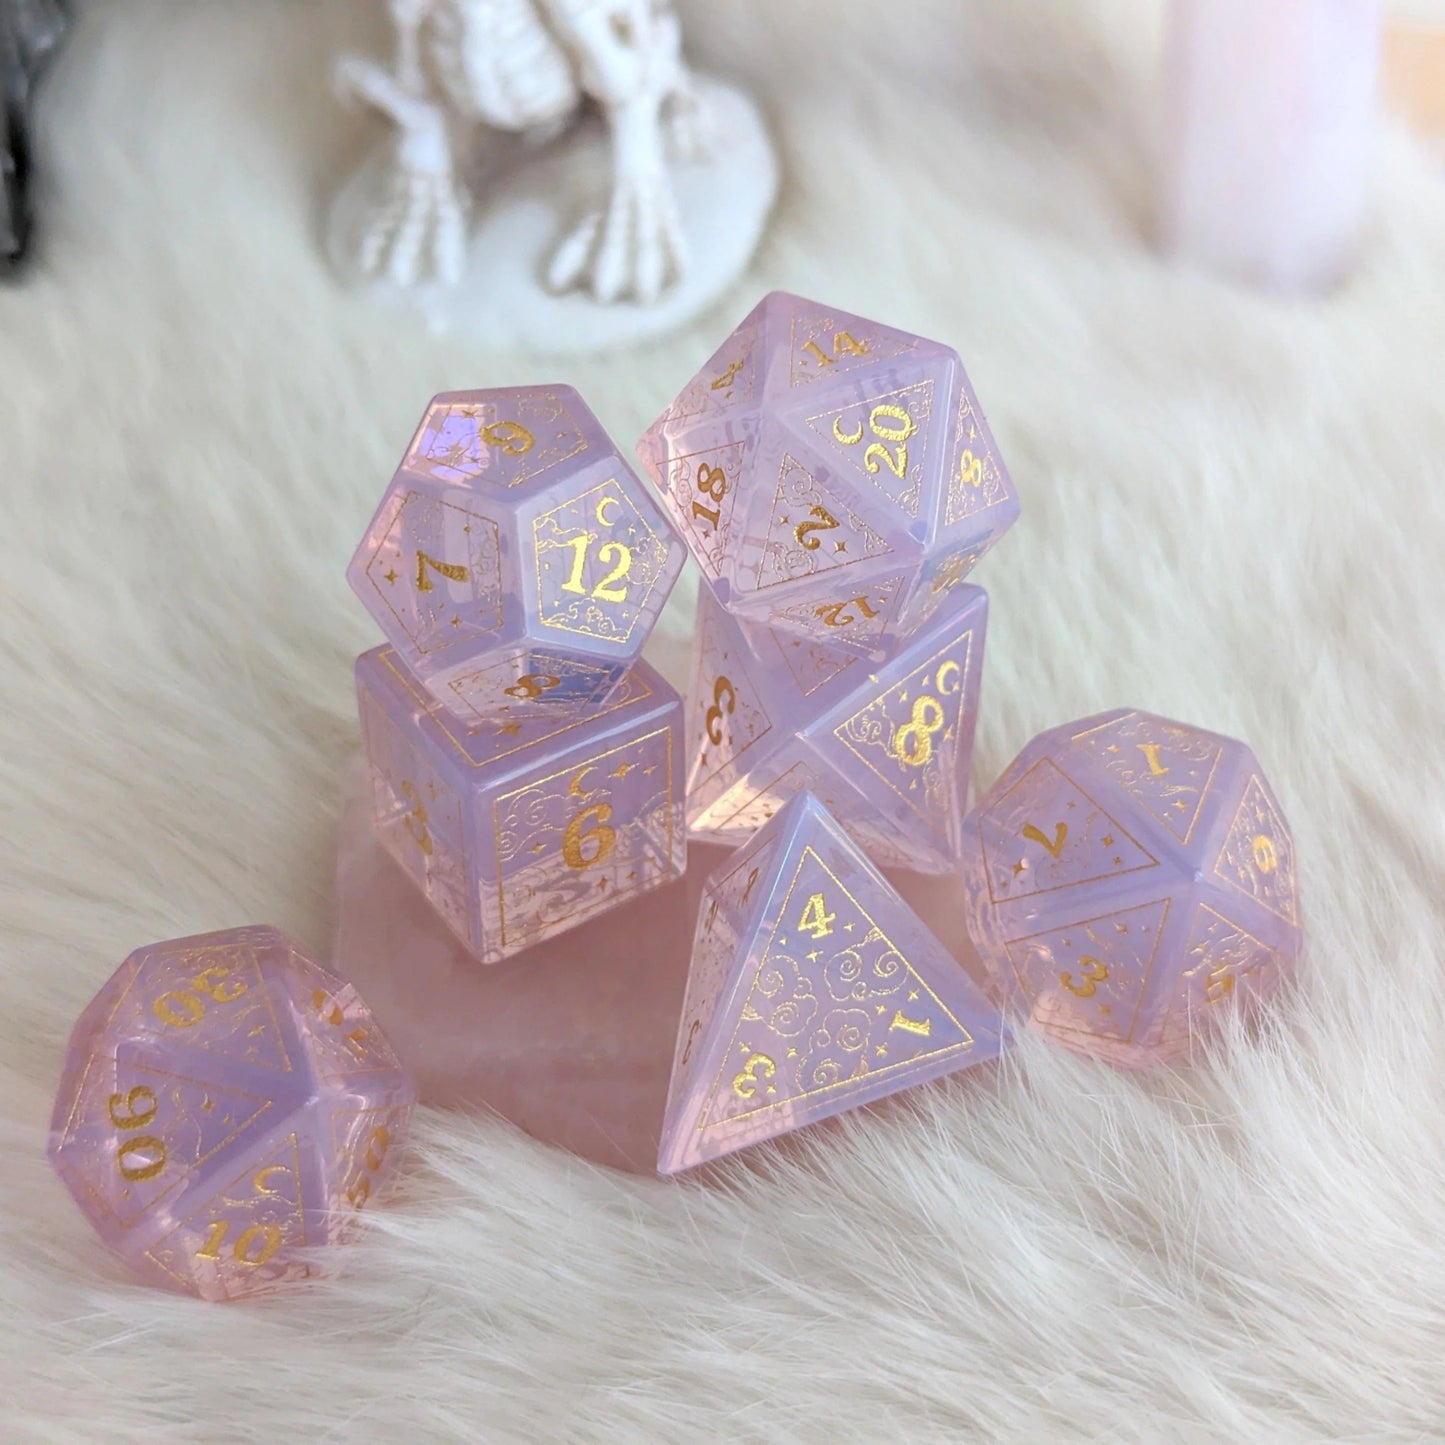 Dreamy Purple Opalite Gemstone Dice - 7 Dice Set (Gold Engraving) - The Fourth Place